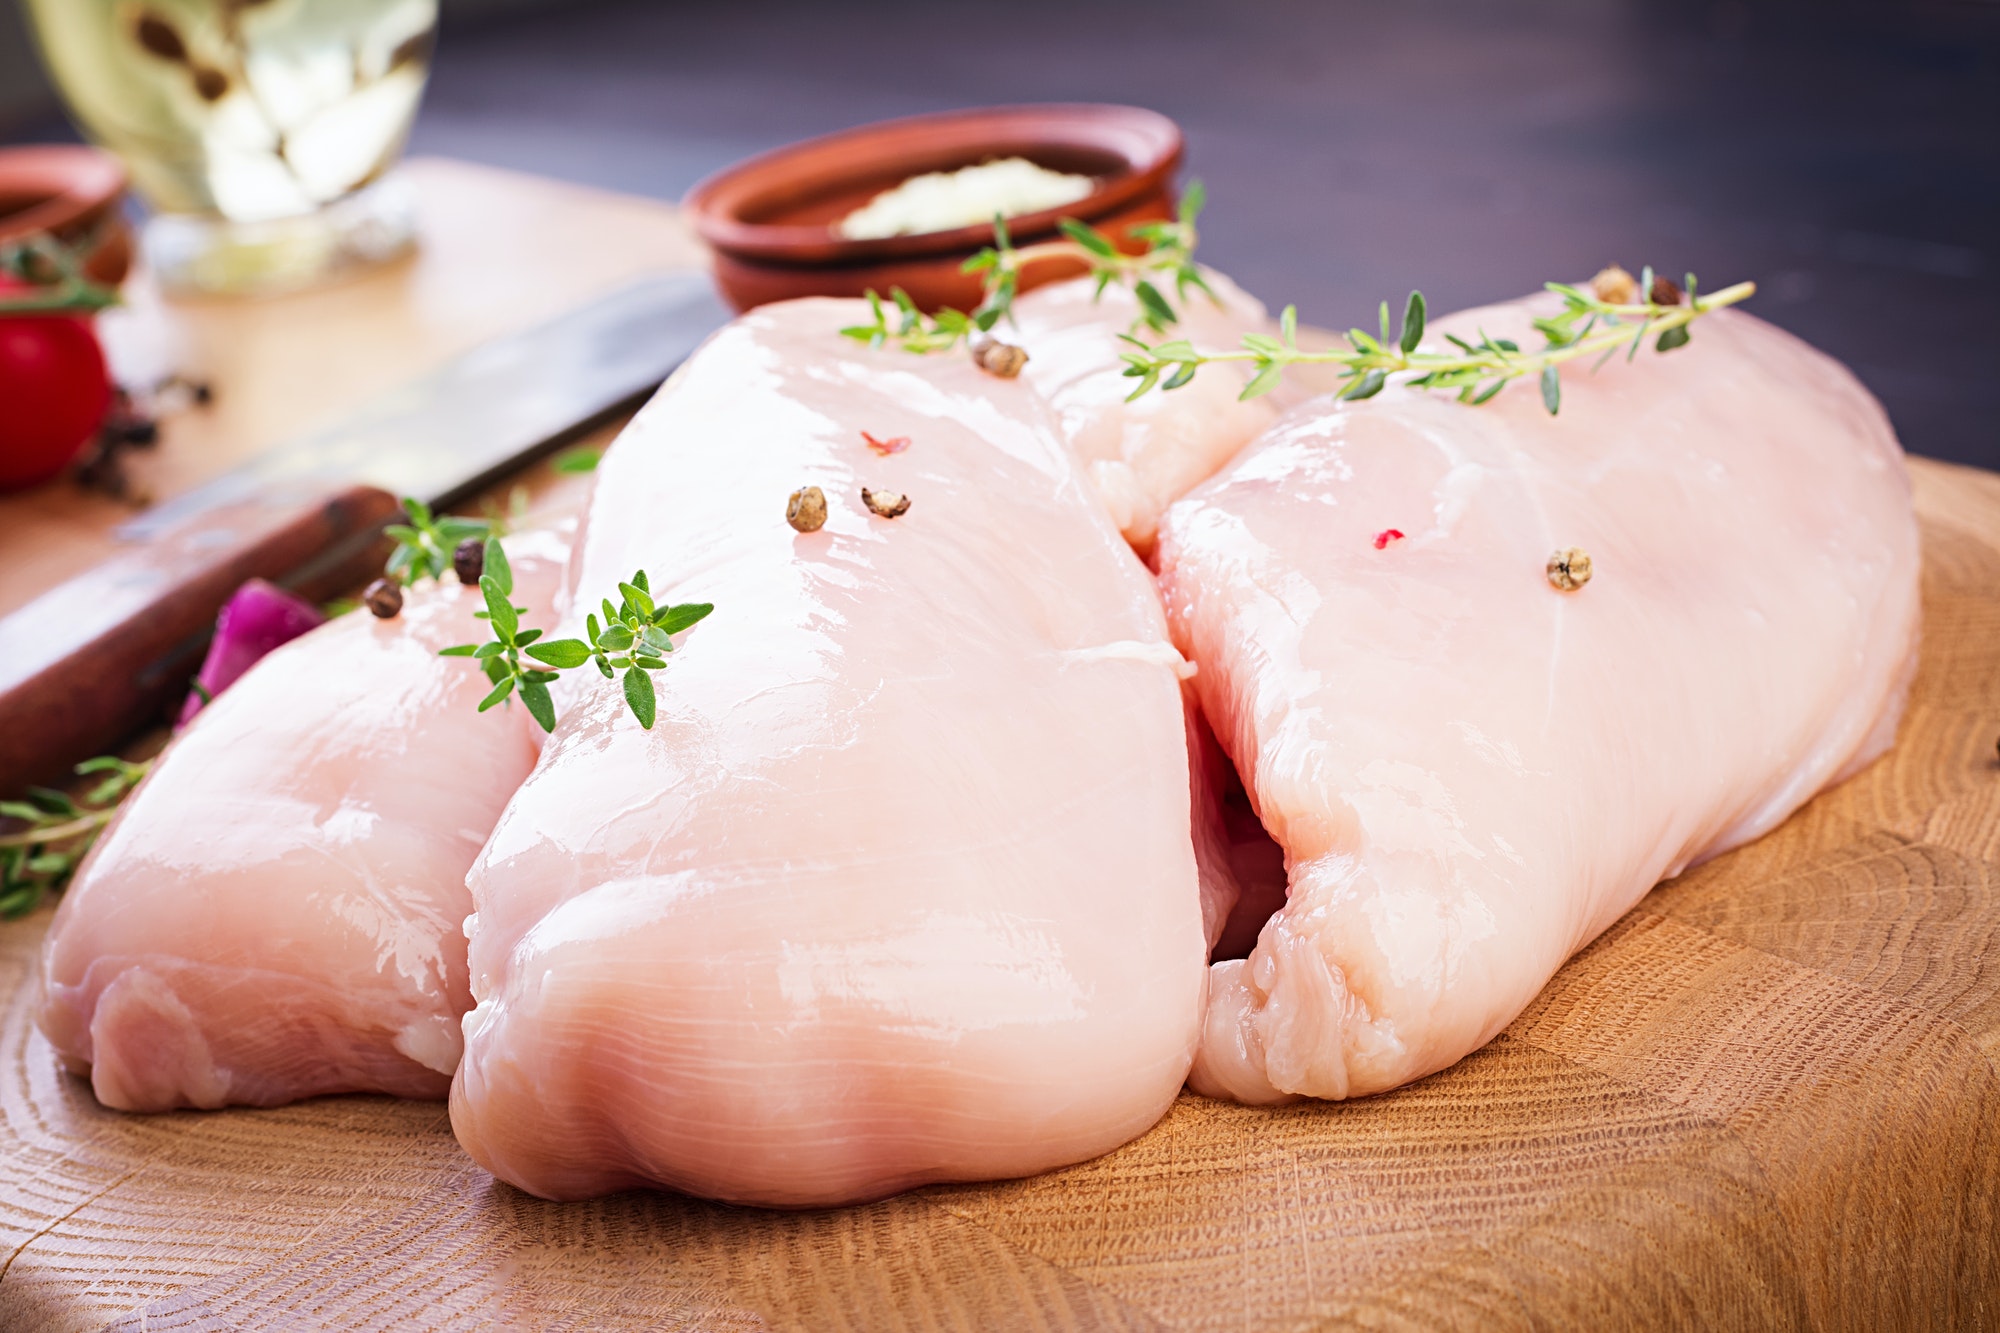 Raw chicken breast fillets on wooden cutting board with herbs and spices.